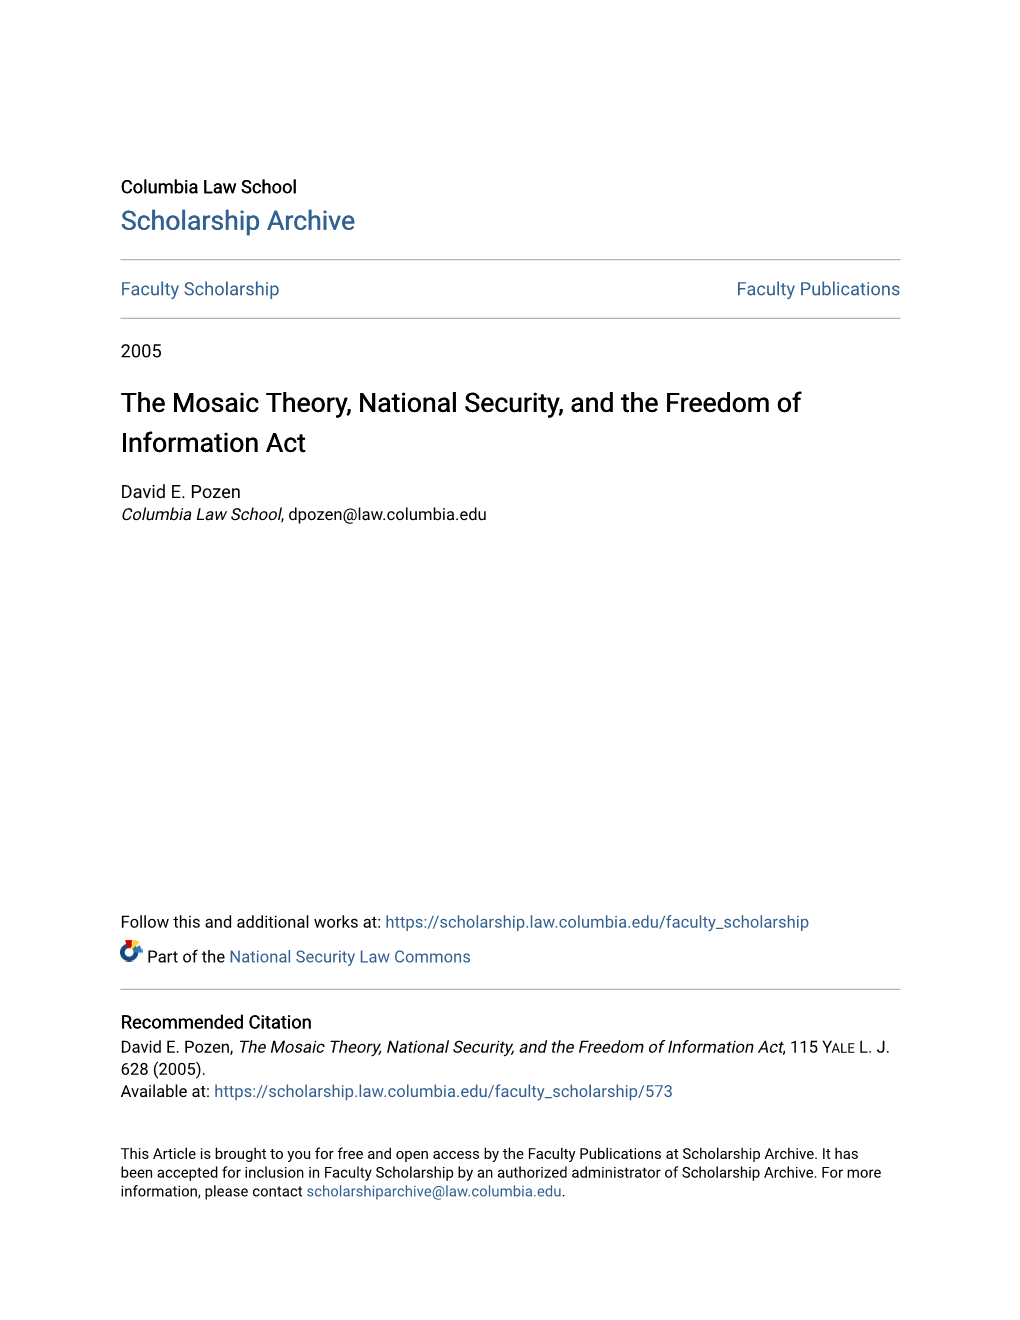 The Mosaic Theory, National Security, and the Freedom of Information Act